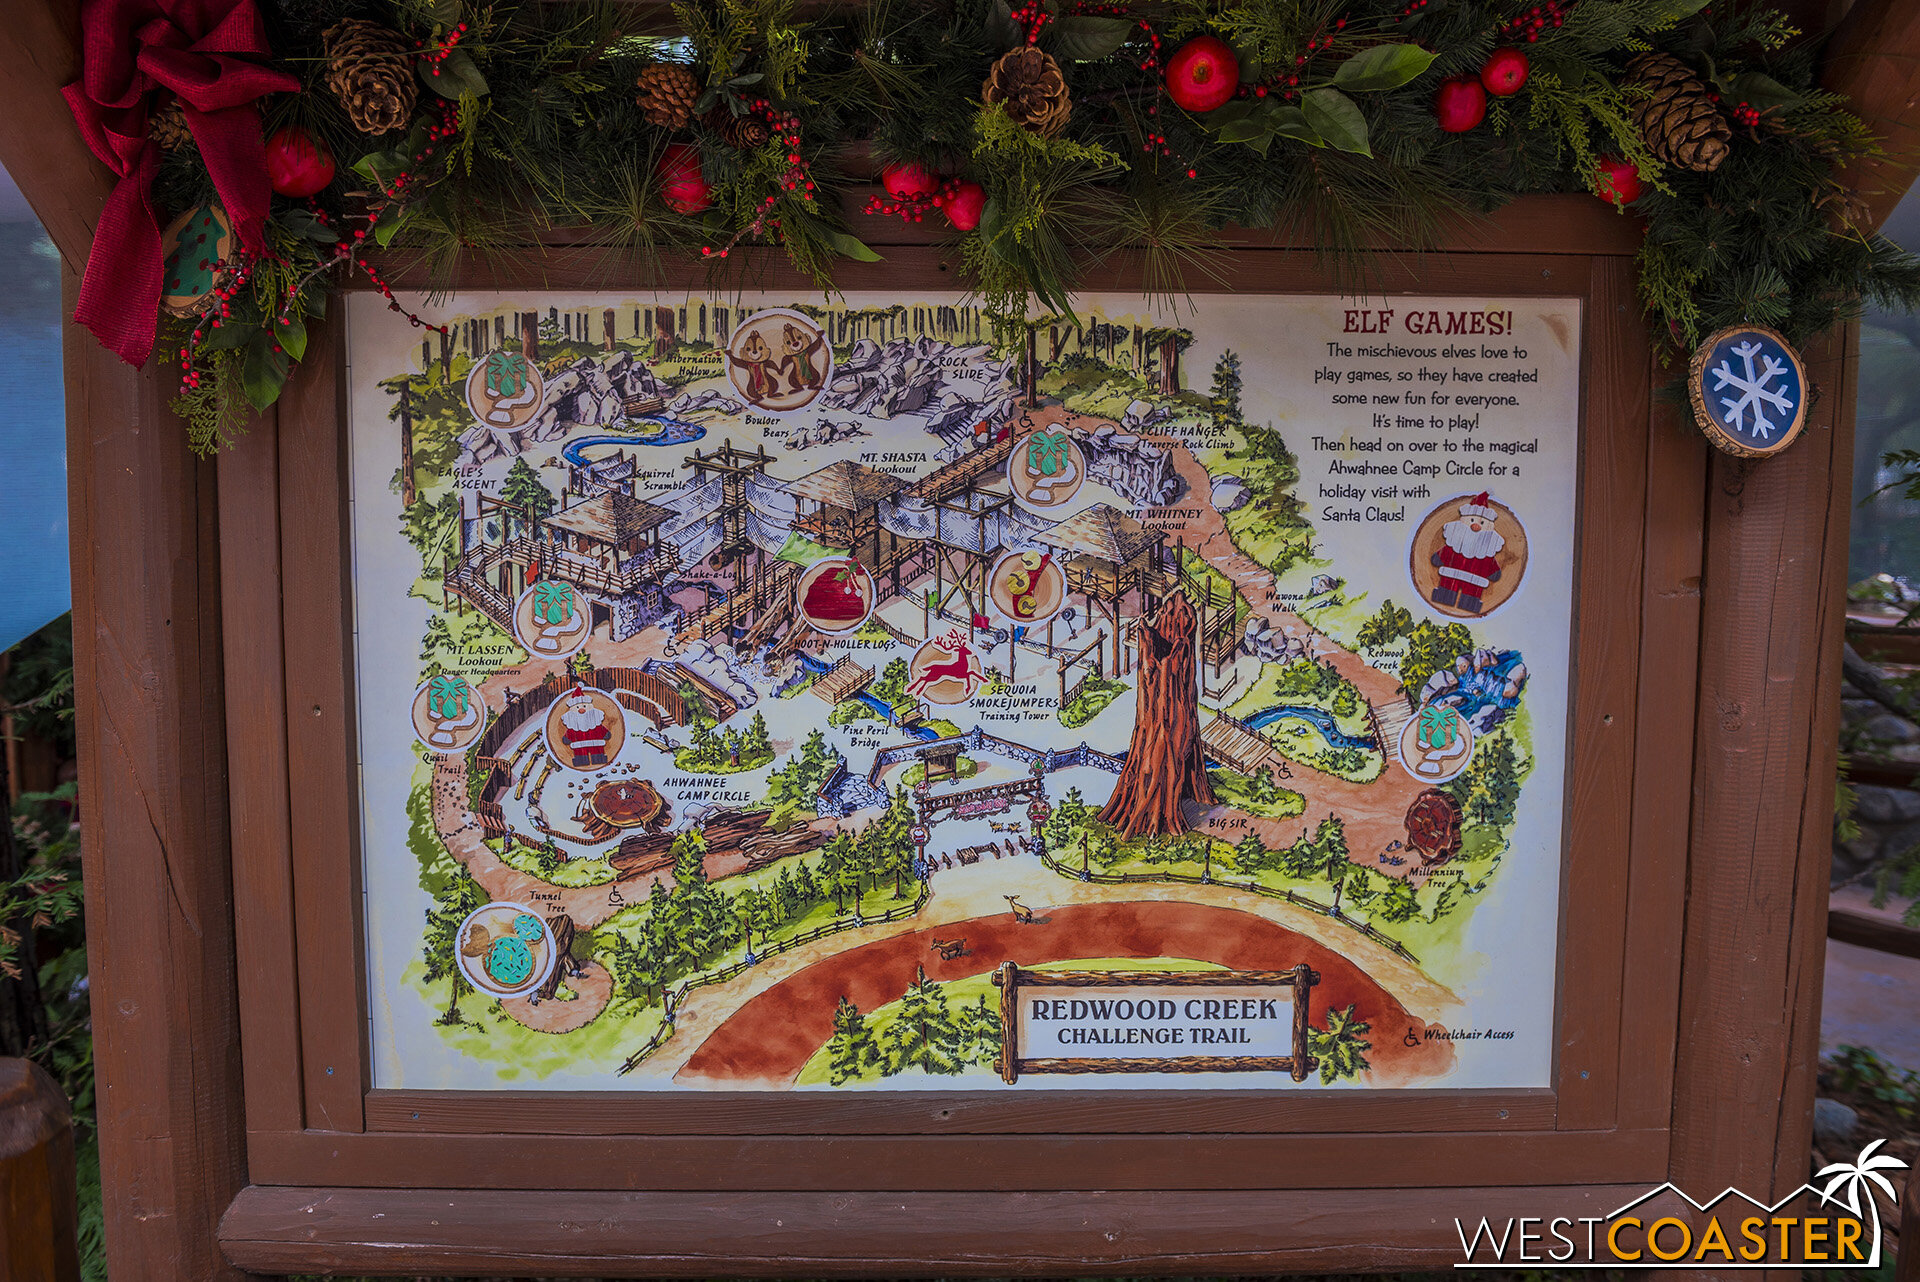  Here’s a map of the place.  Plenty of “Elf Games” activities. 